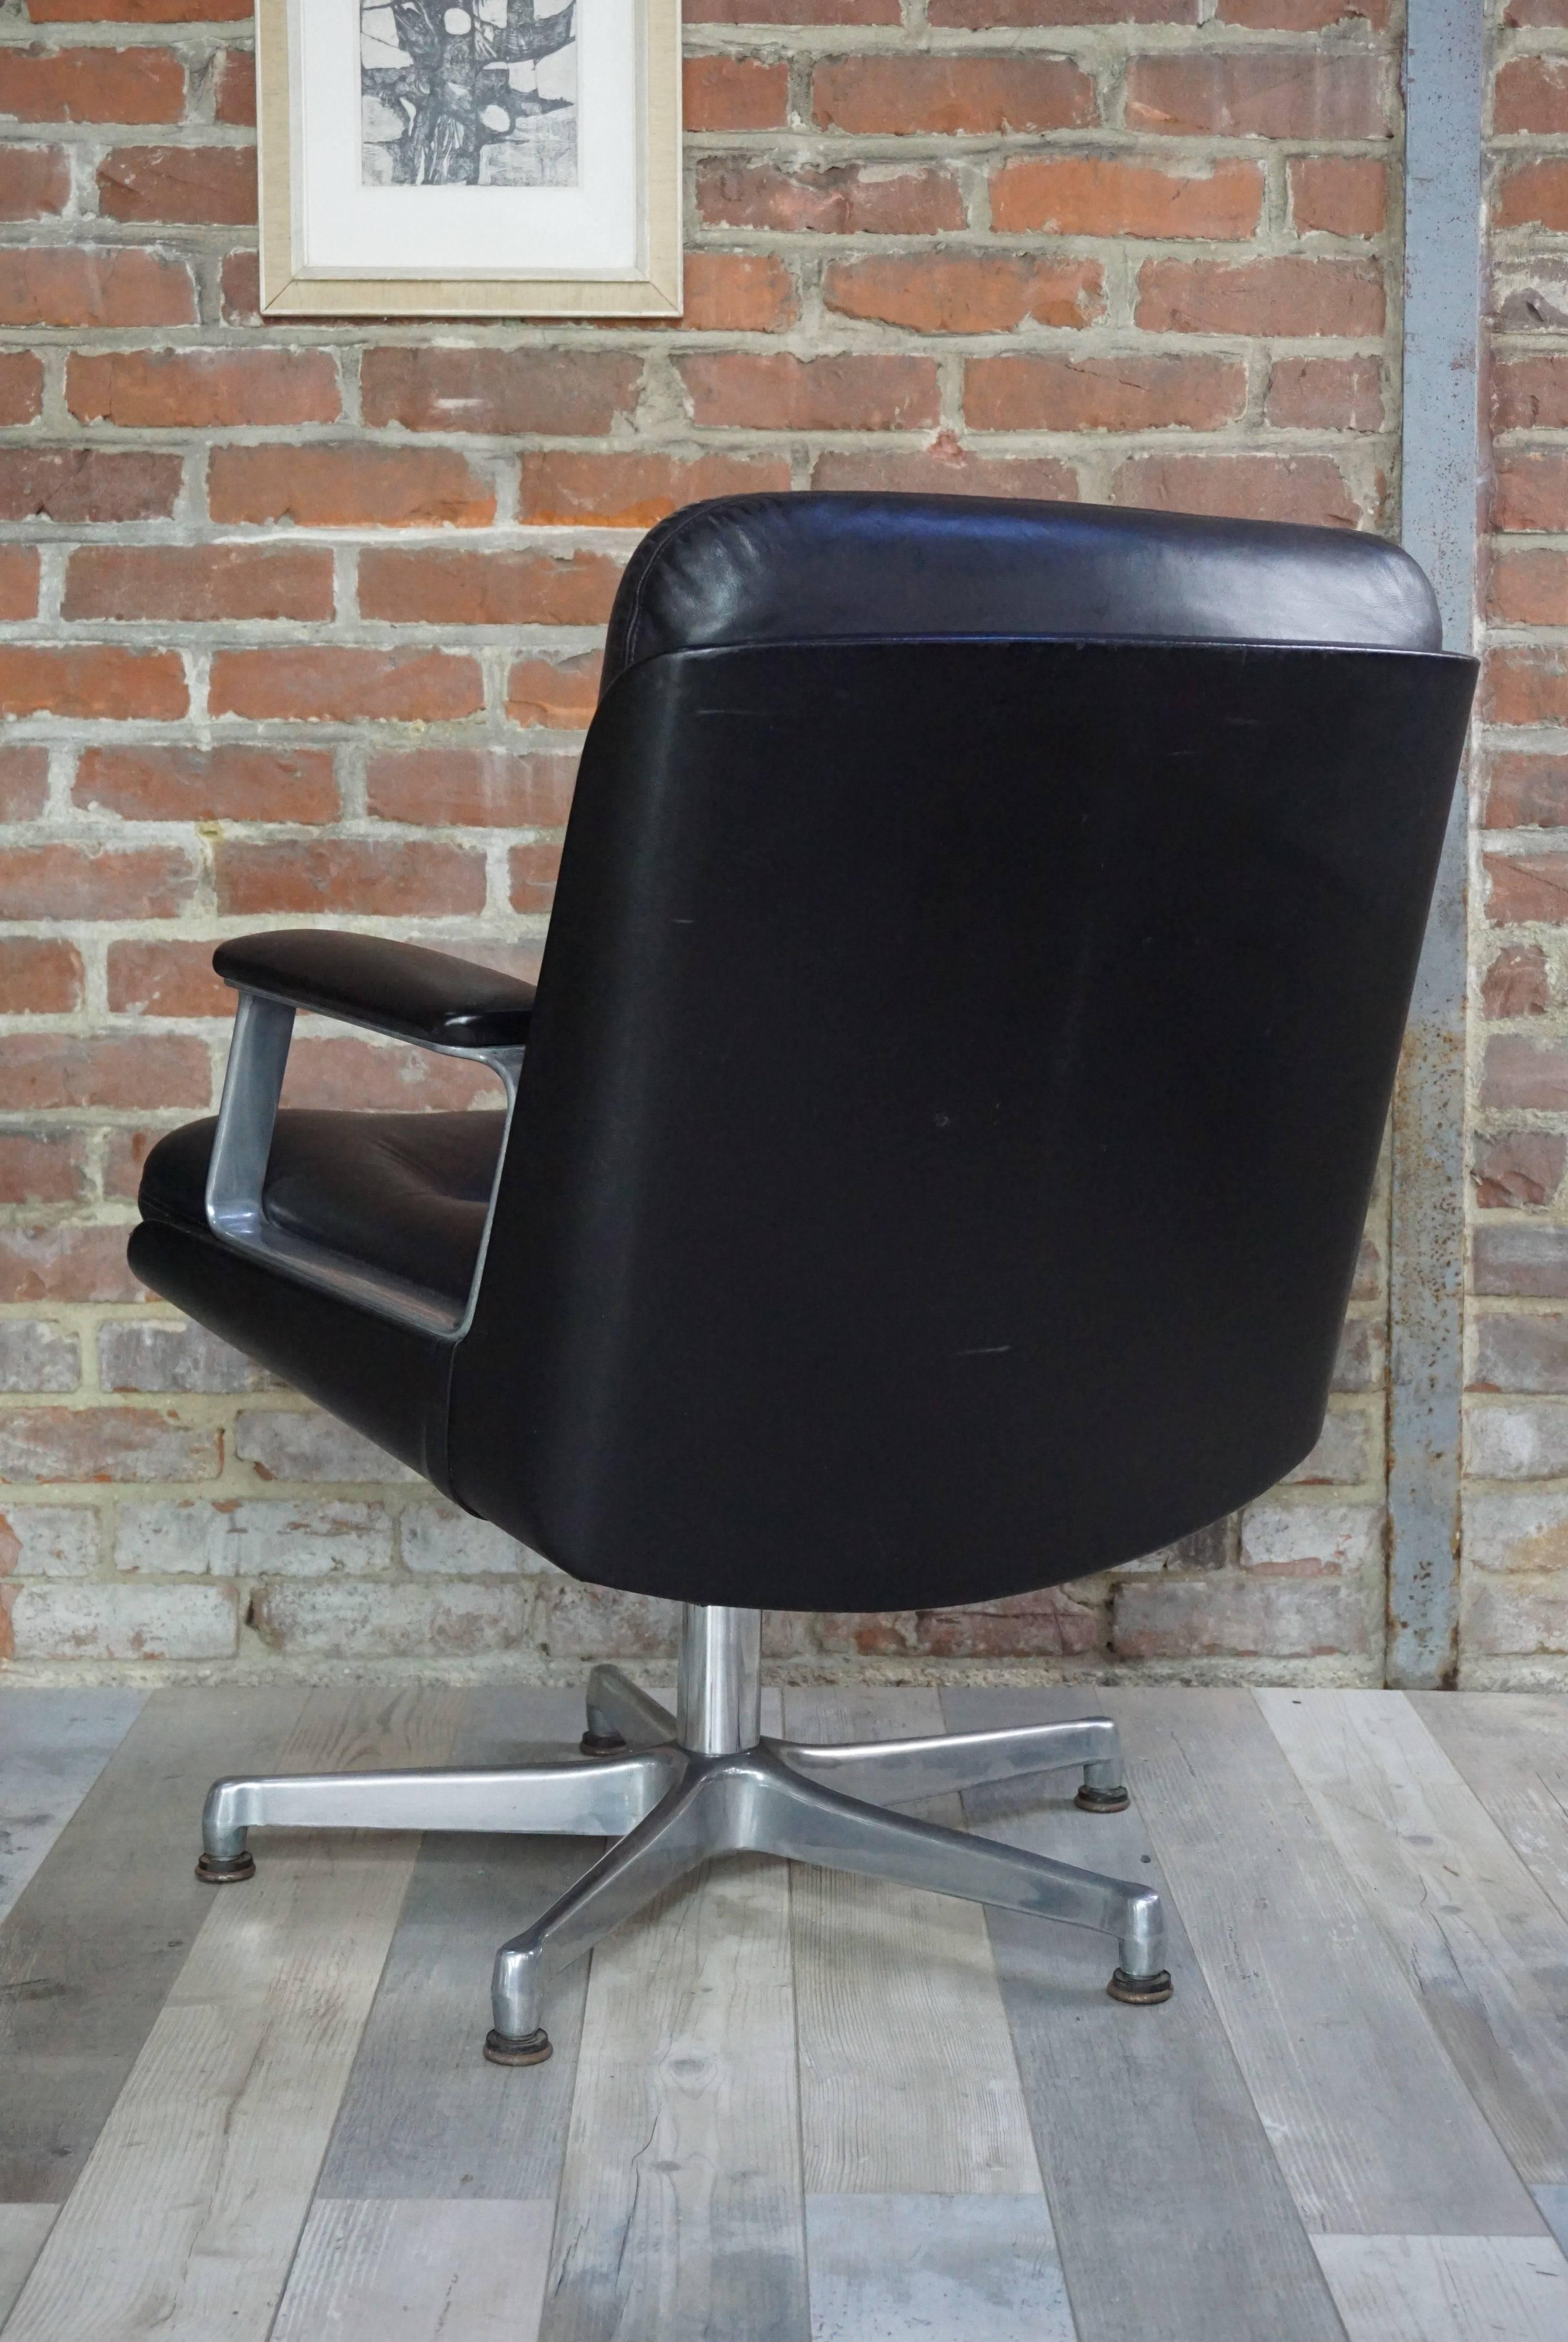 Leather armchair (not adjustable in height and are not swiveled) design by Vaghi, Italian manufacturer of high-end office chairs since 1964. This office chair is in black leather of excellent quality. Measure: Seat height 50 cm.